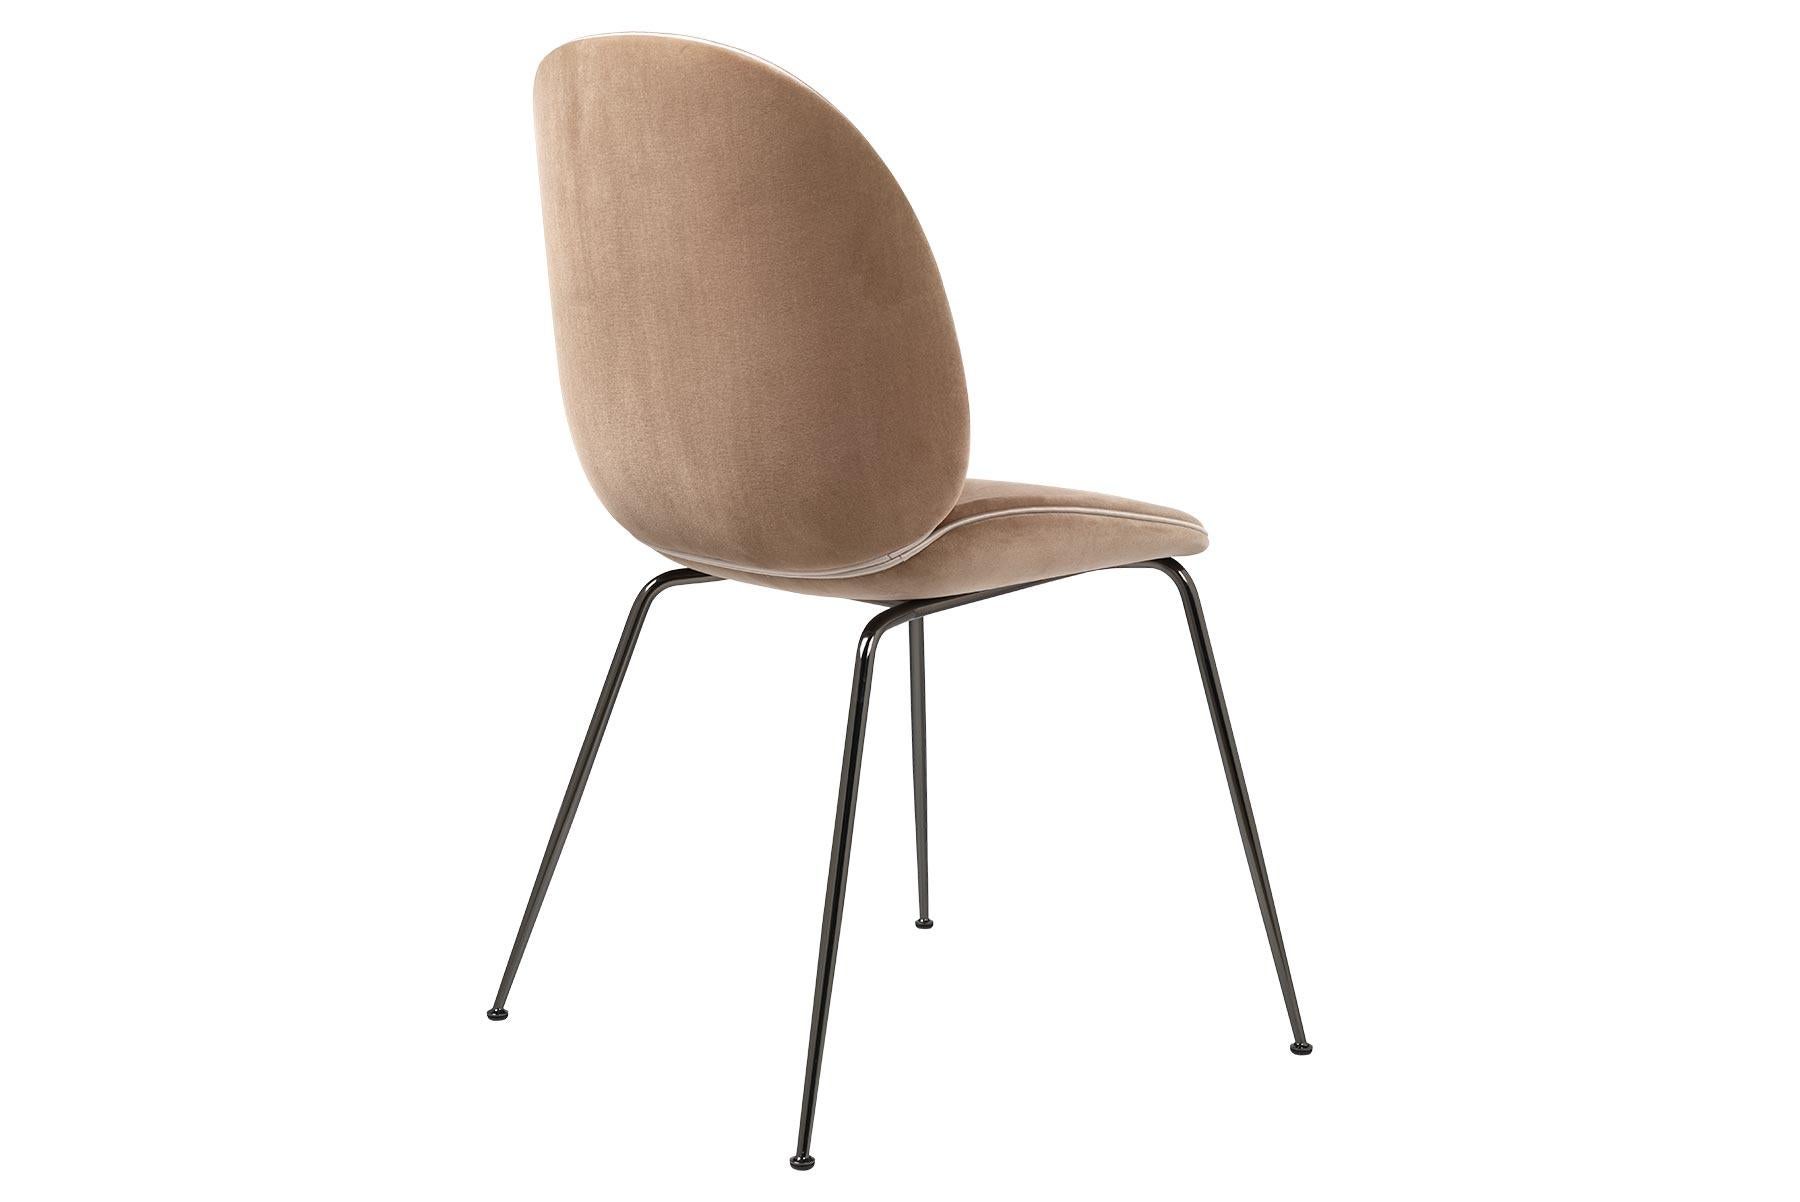 The Beetle chair has since its introduction in 2013 being well received by end-consumers as well as interior architects. Due to its appealing design, outstanding comfort and unique customization possibilities, the chair can be seen in many of the